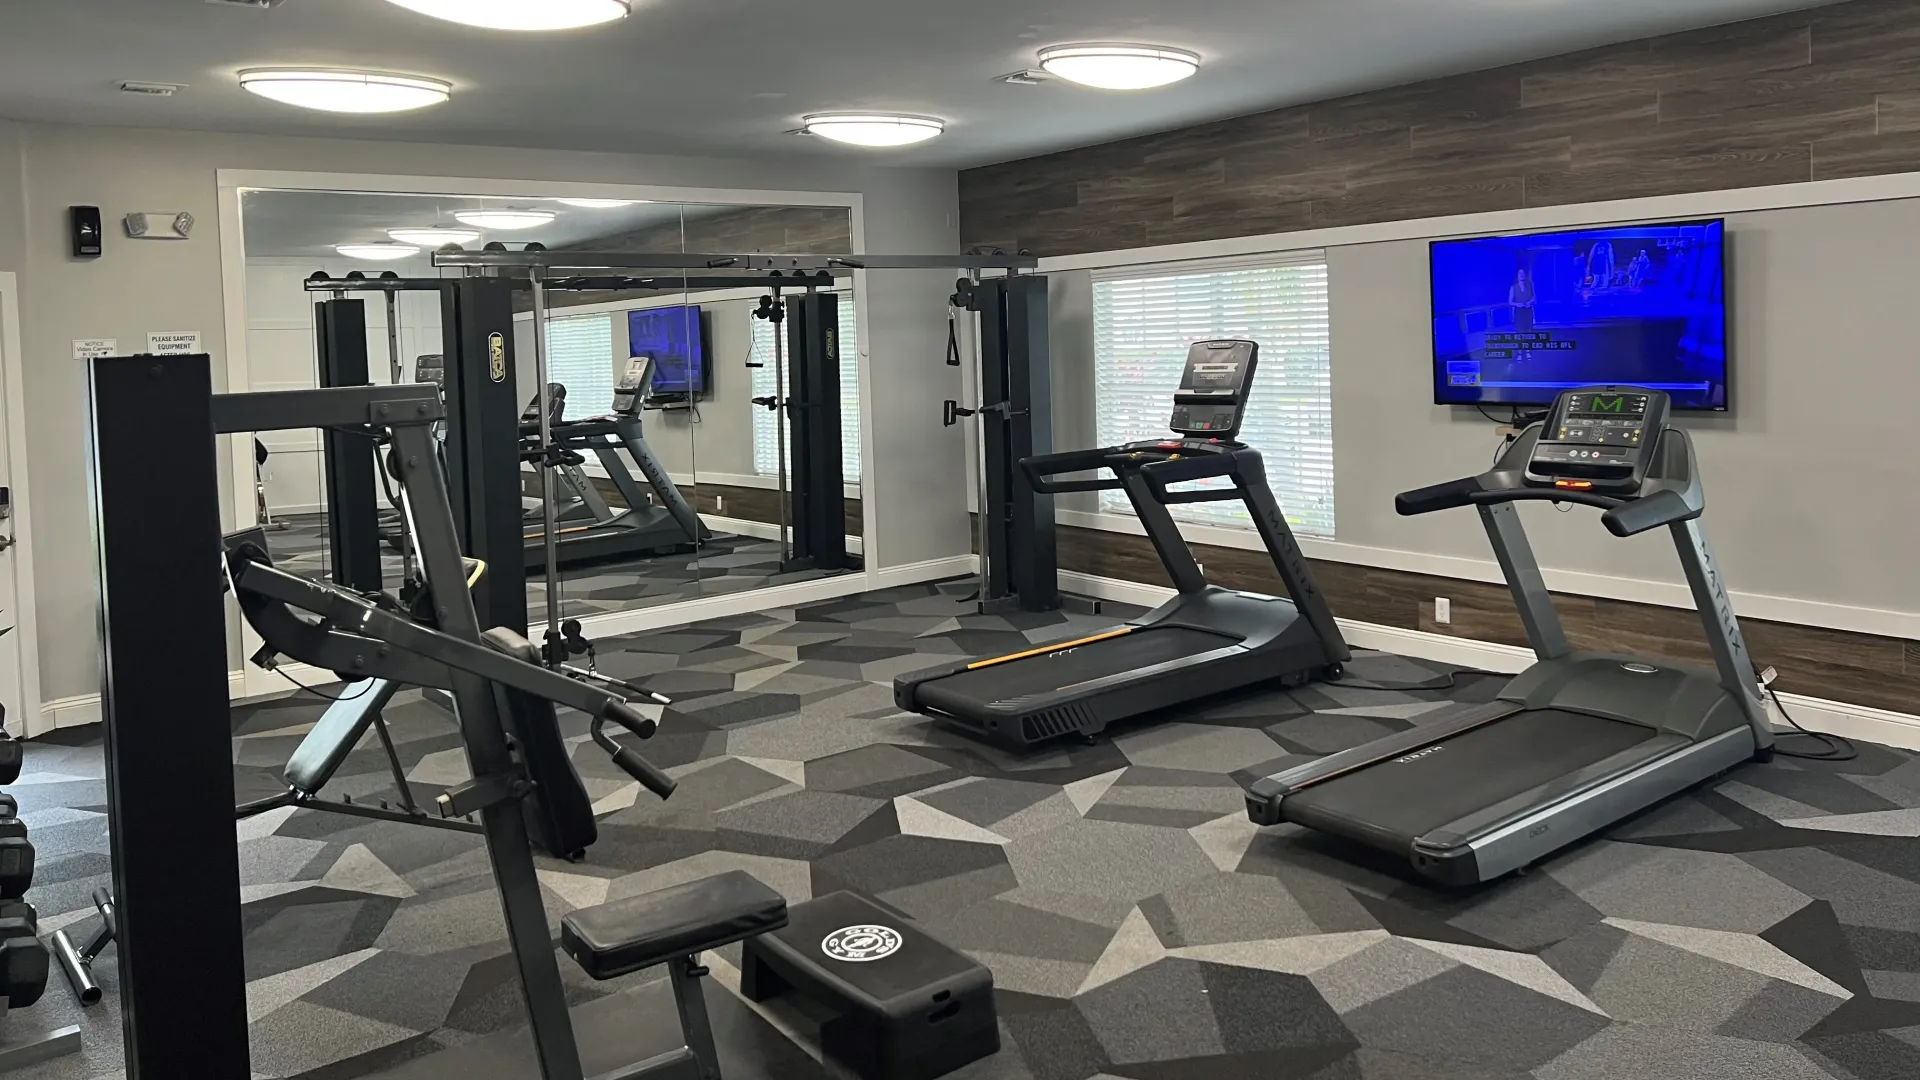 The interior of the resident gym, showcasing state-of-the-art workout equipment, mirrored walls, and a variety of workout equipment ranging from treadmills to weight training machines.